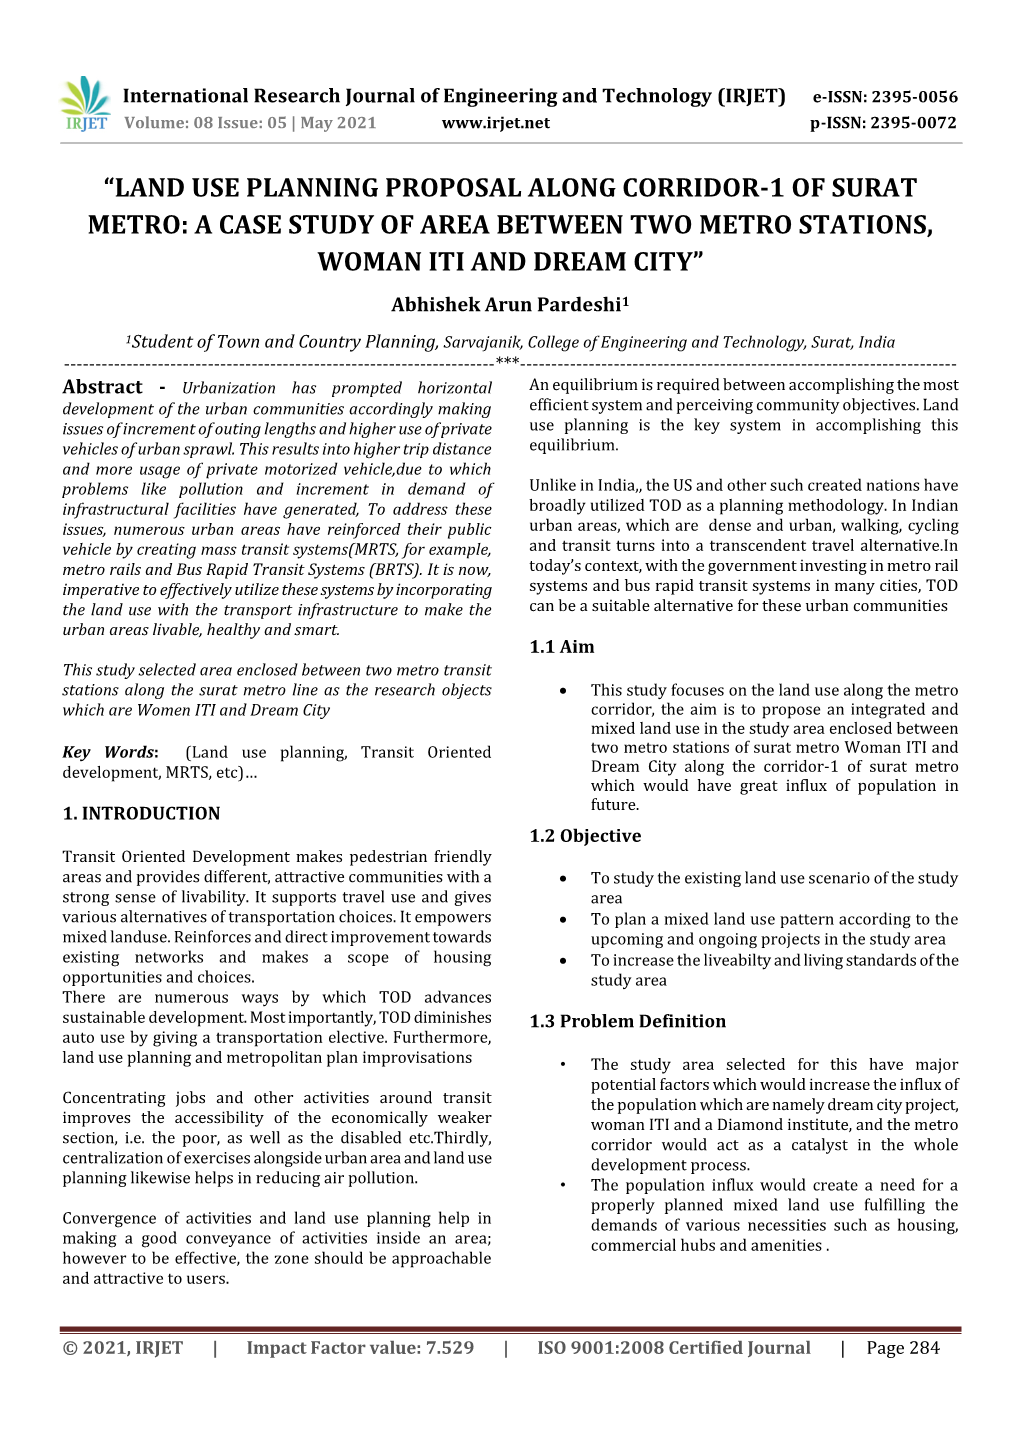 LAND USE PLANNING PROPOSAL ALONG CORRIDOR-1 of SURAT METRO: a CASE STUDY of AREA BETWEEN TWO METRO STATIONS, WOMAN ITI and DREAM CITY” Abhishek Arun Pardeshi1